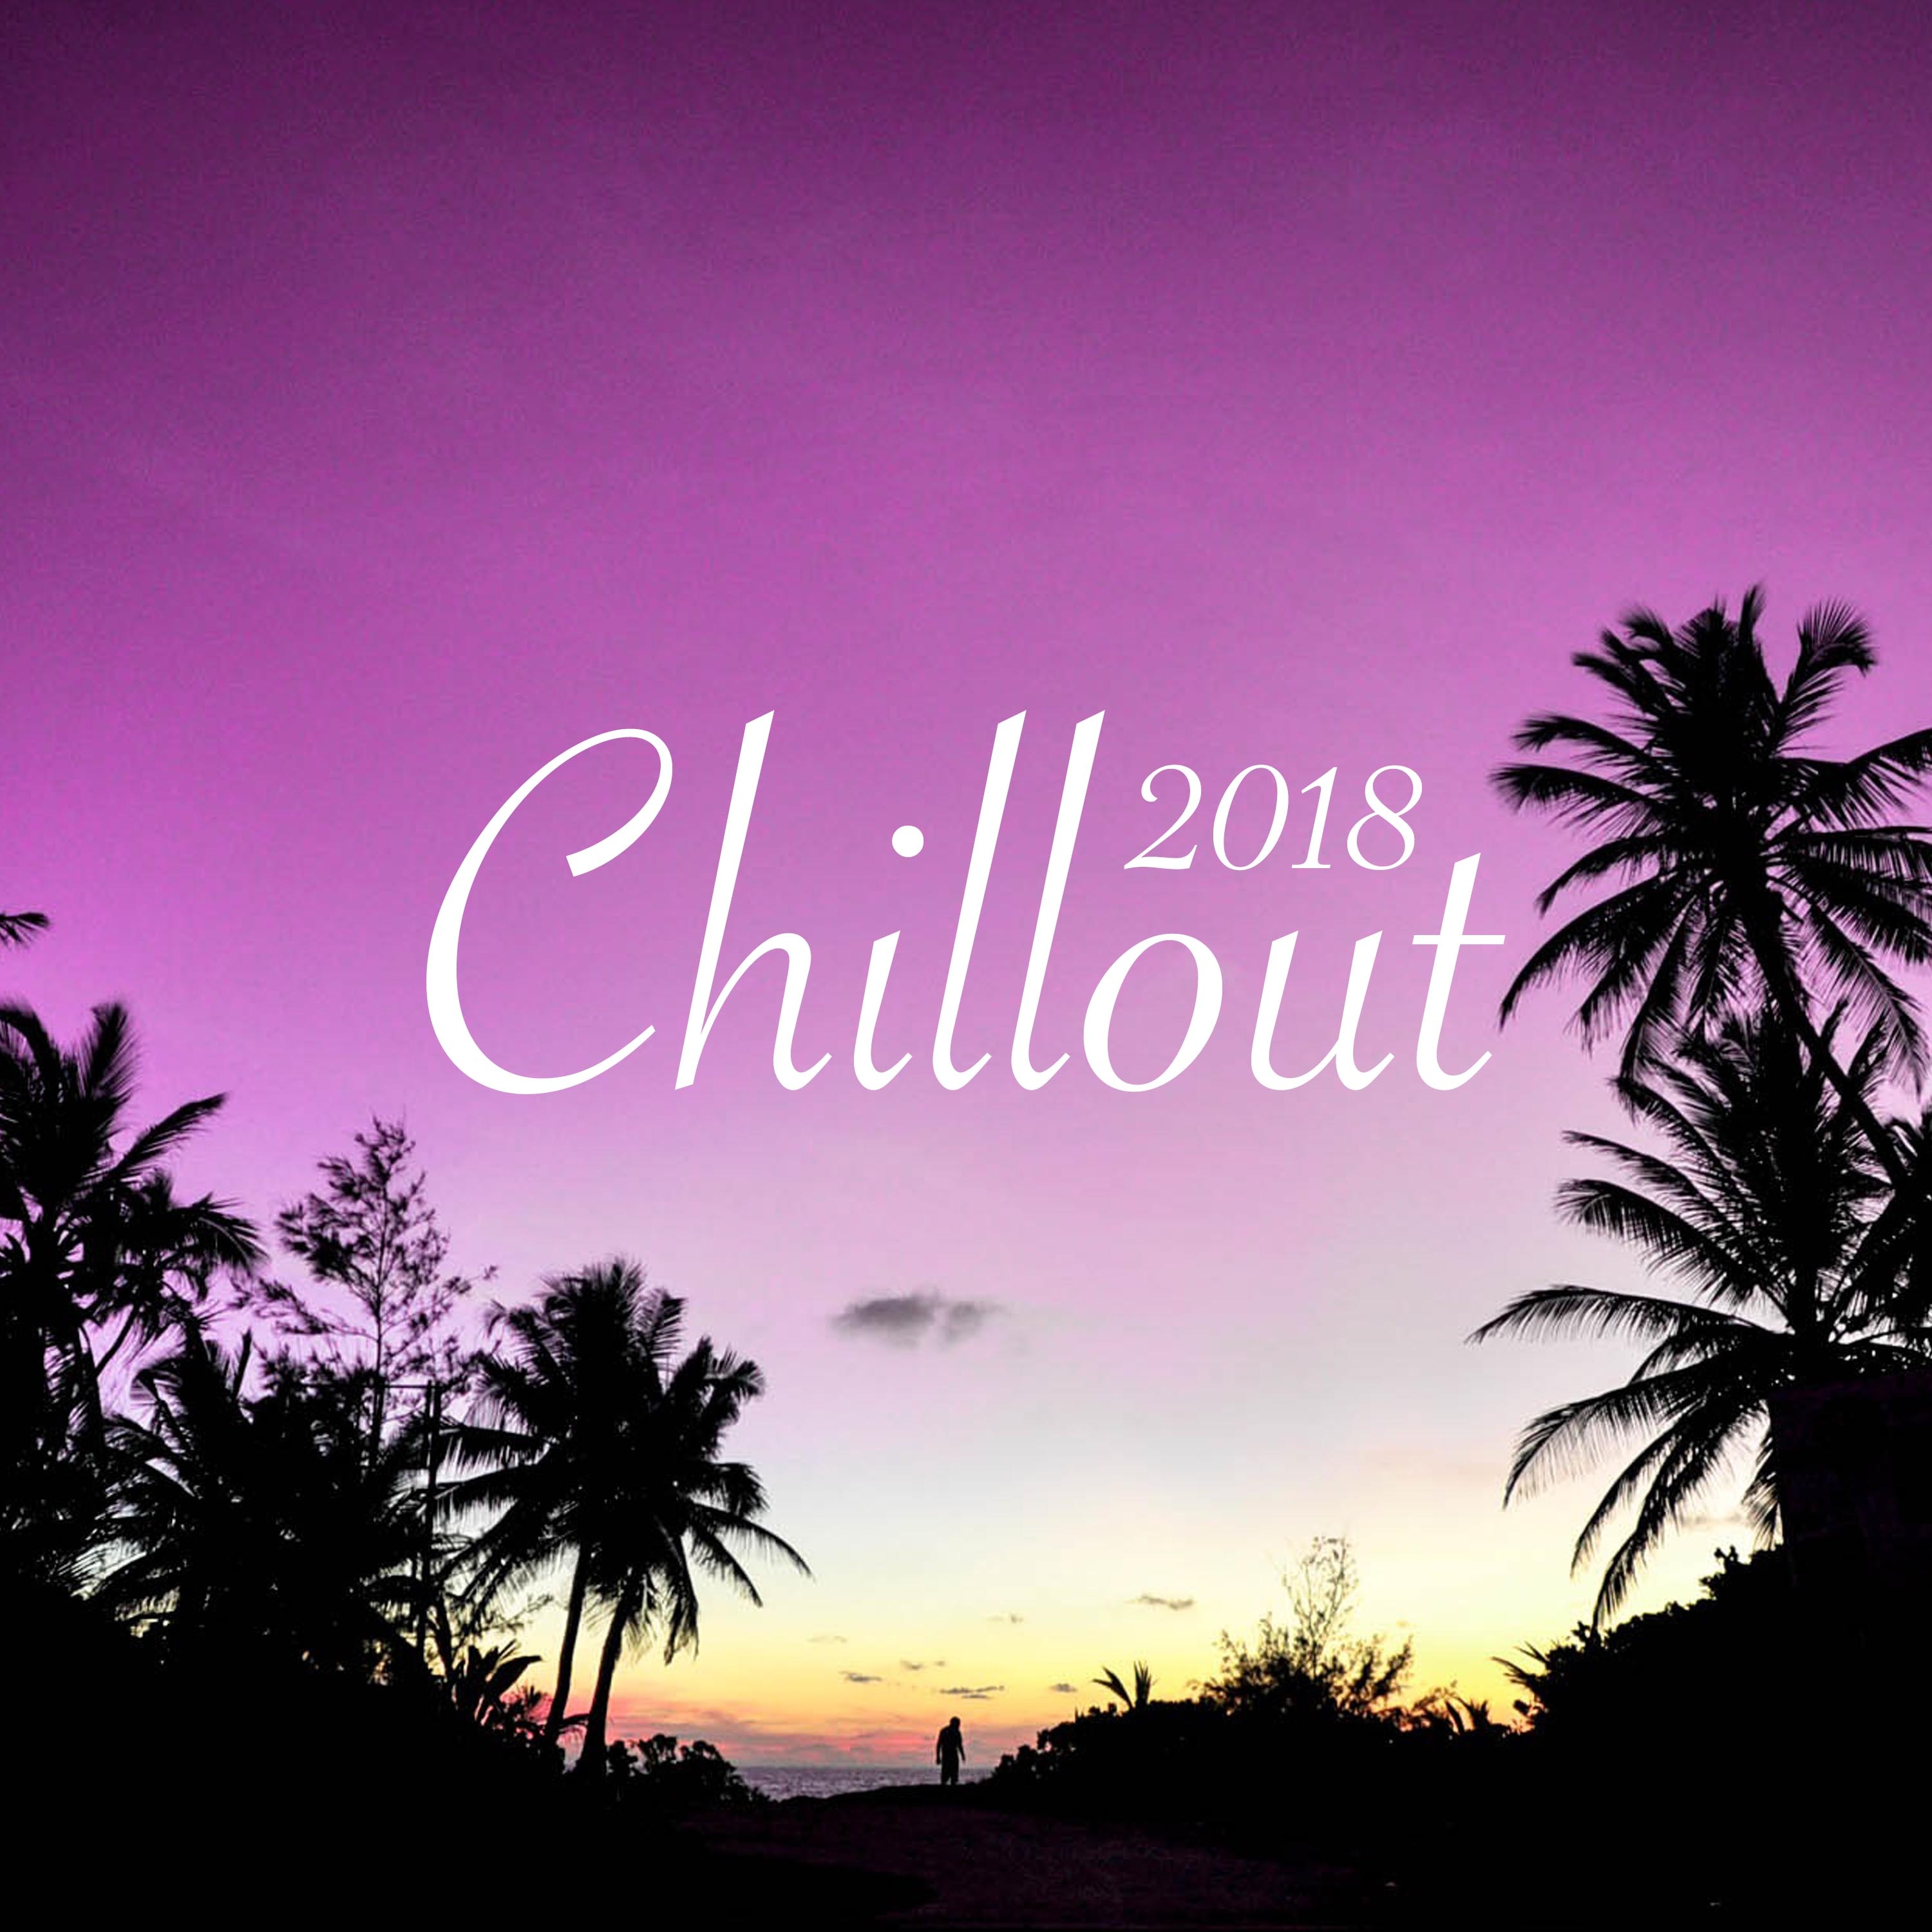 2018 Chillout - Tropical Chillout Life, Beach House, Cuba Sounds